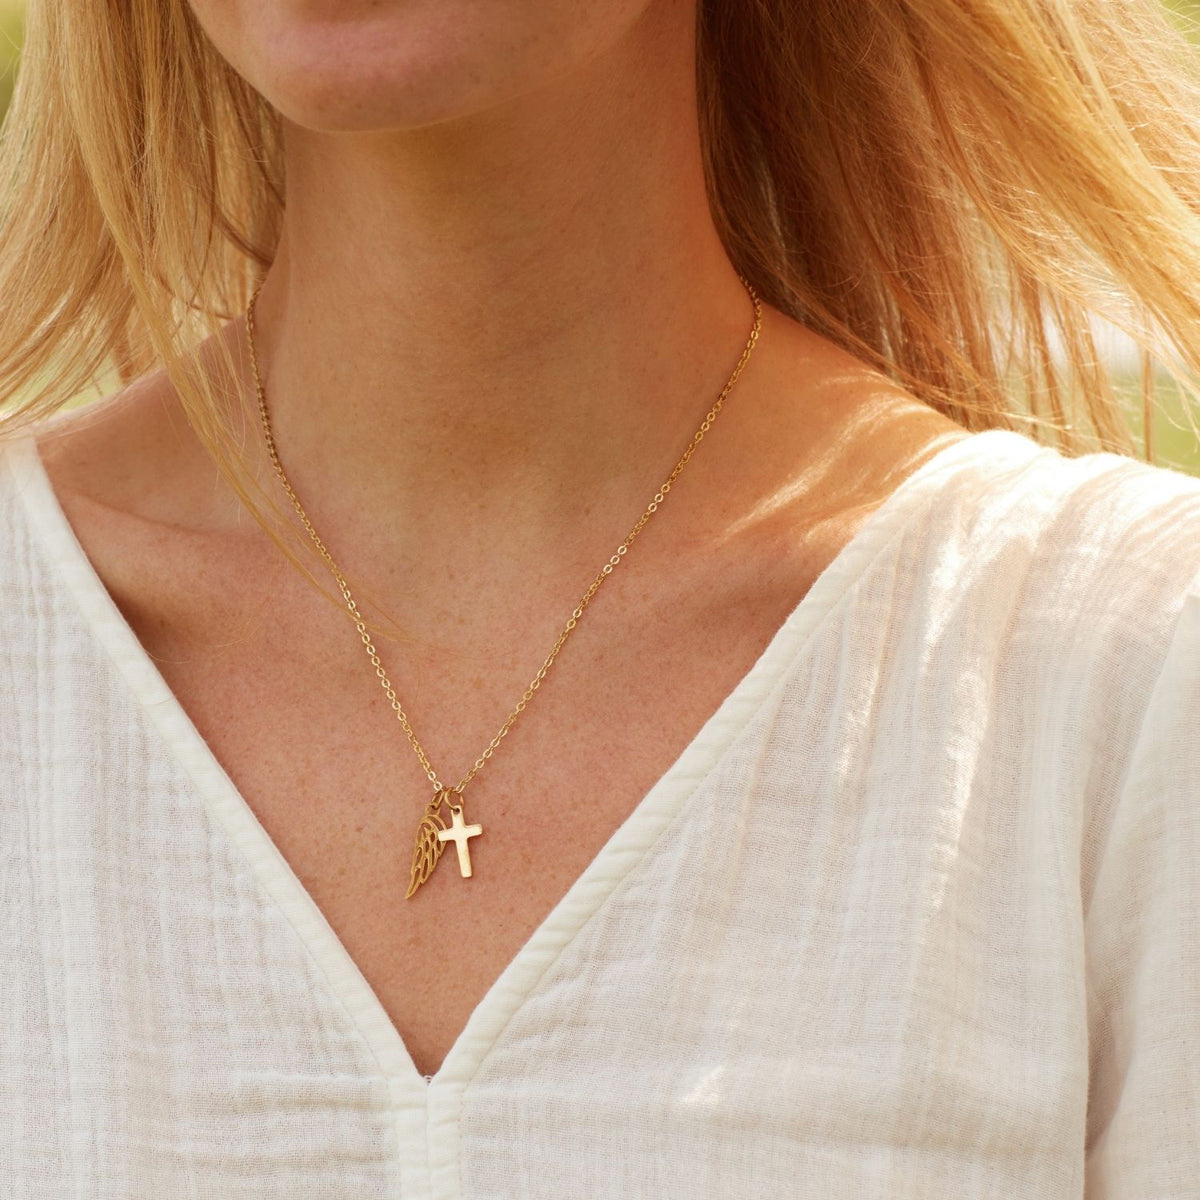 In Memory of Your Beautiful Baby | So Missed and Very Dear | Cross Necklace